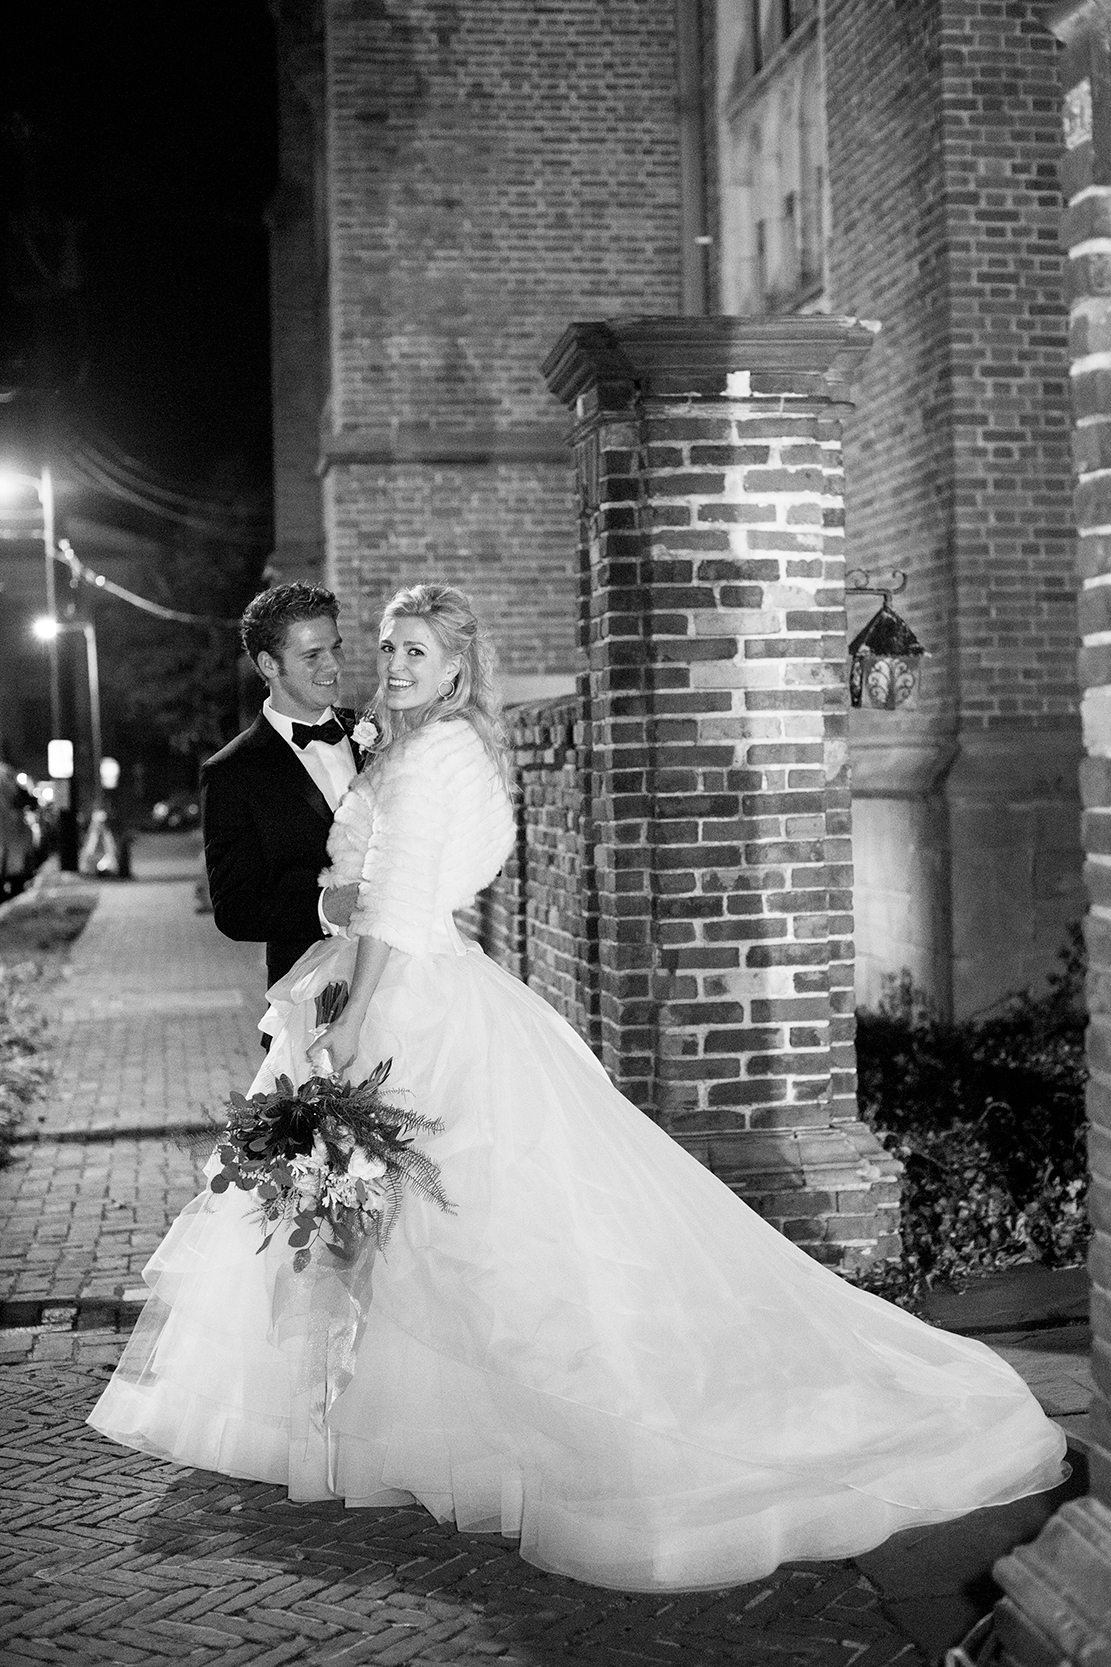 Wedding Preview  Billy and Paige - Image Property of www.j-dphoto.com